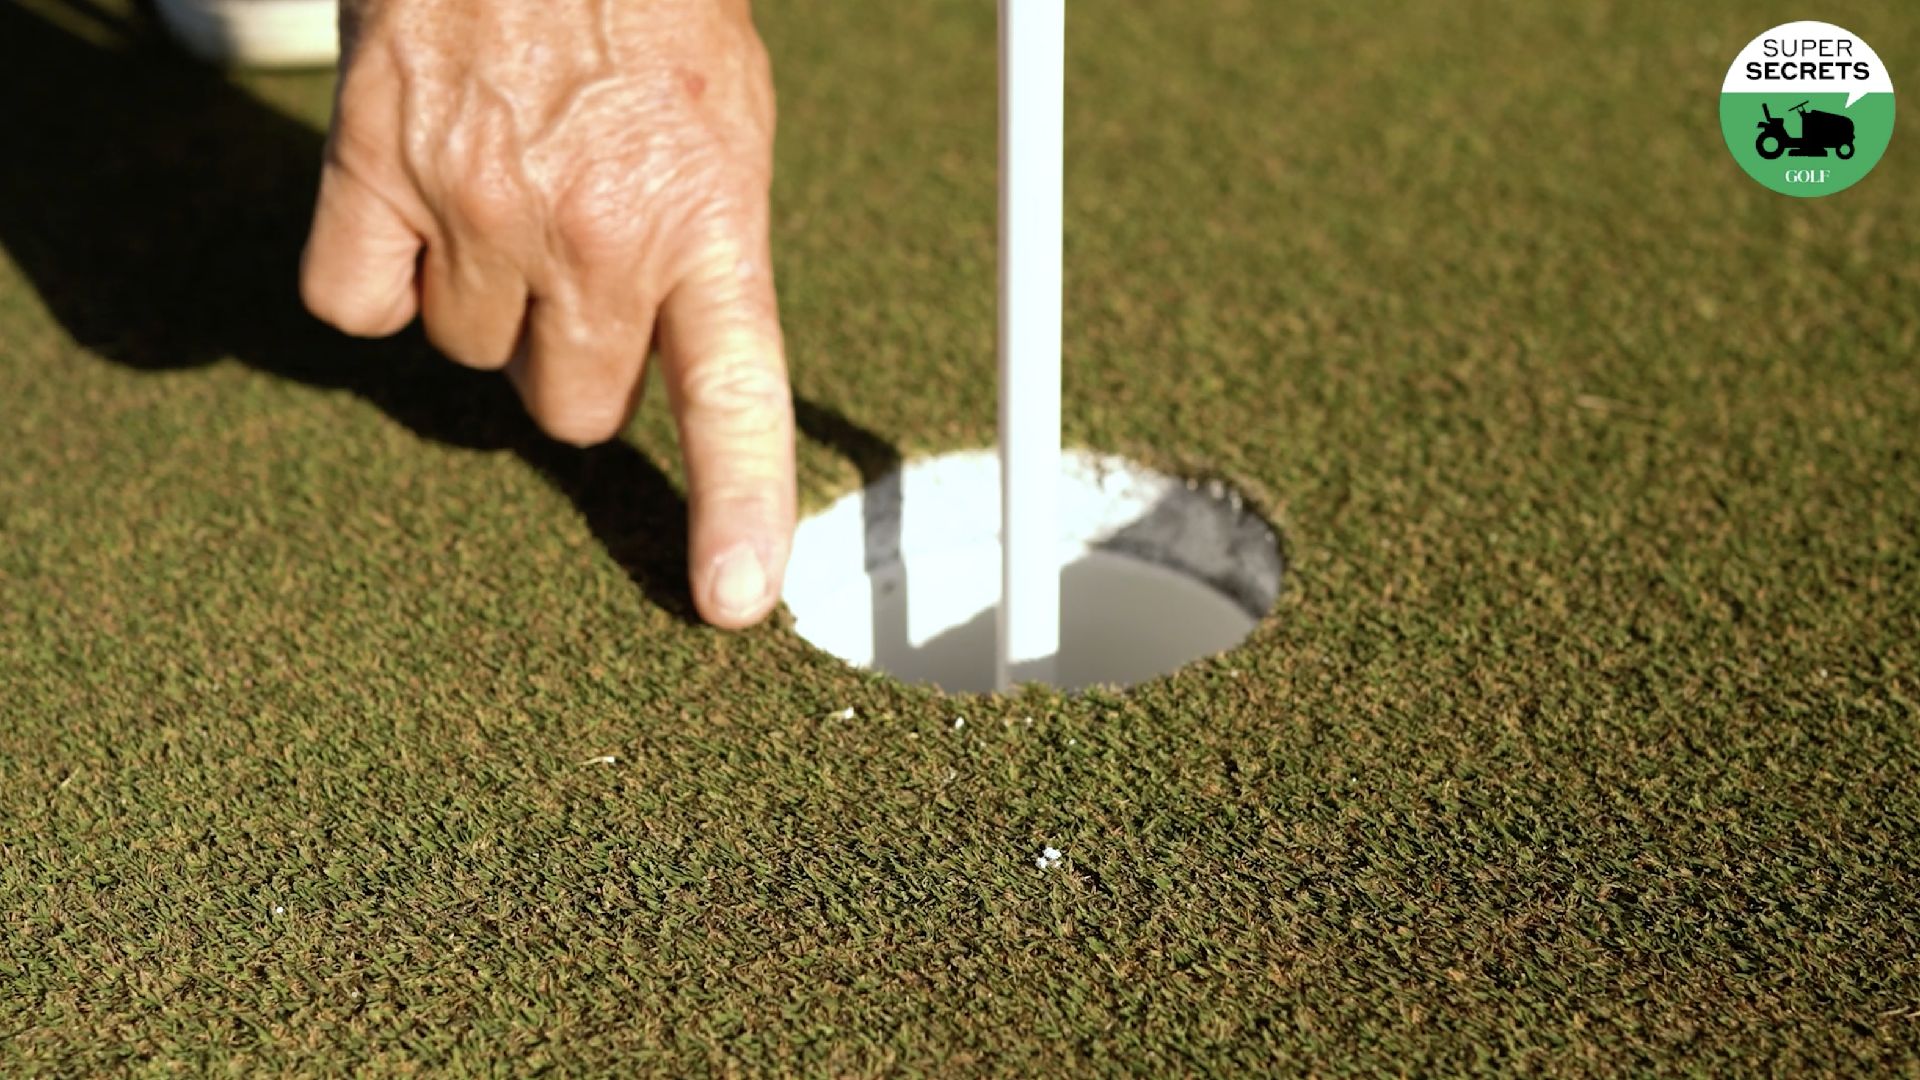 Made a putt with the flag in? How to safely get your ball out | Super Secrets